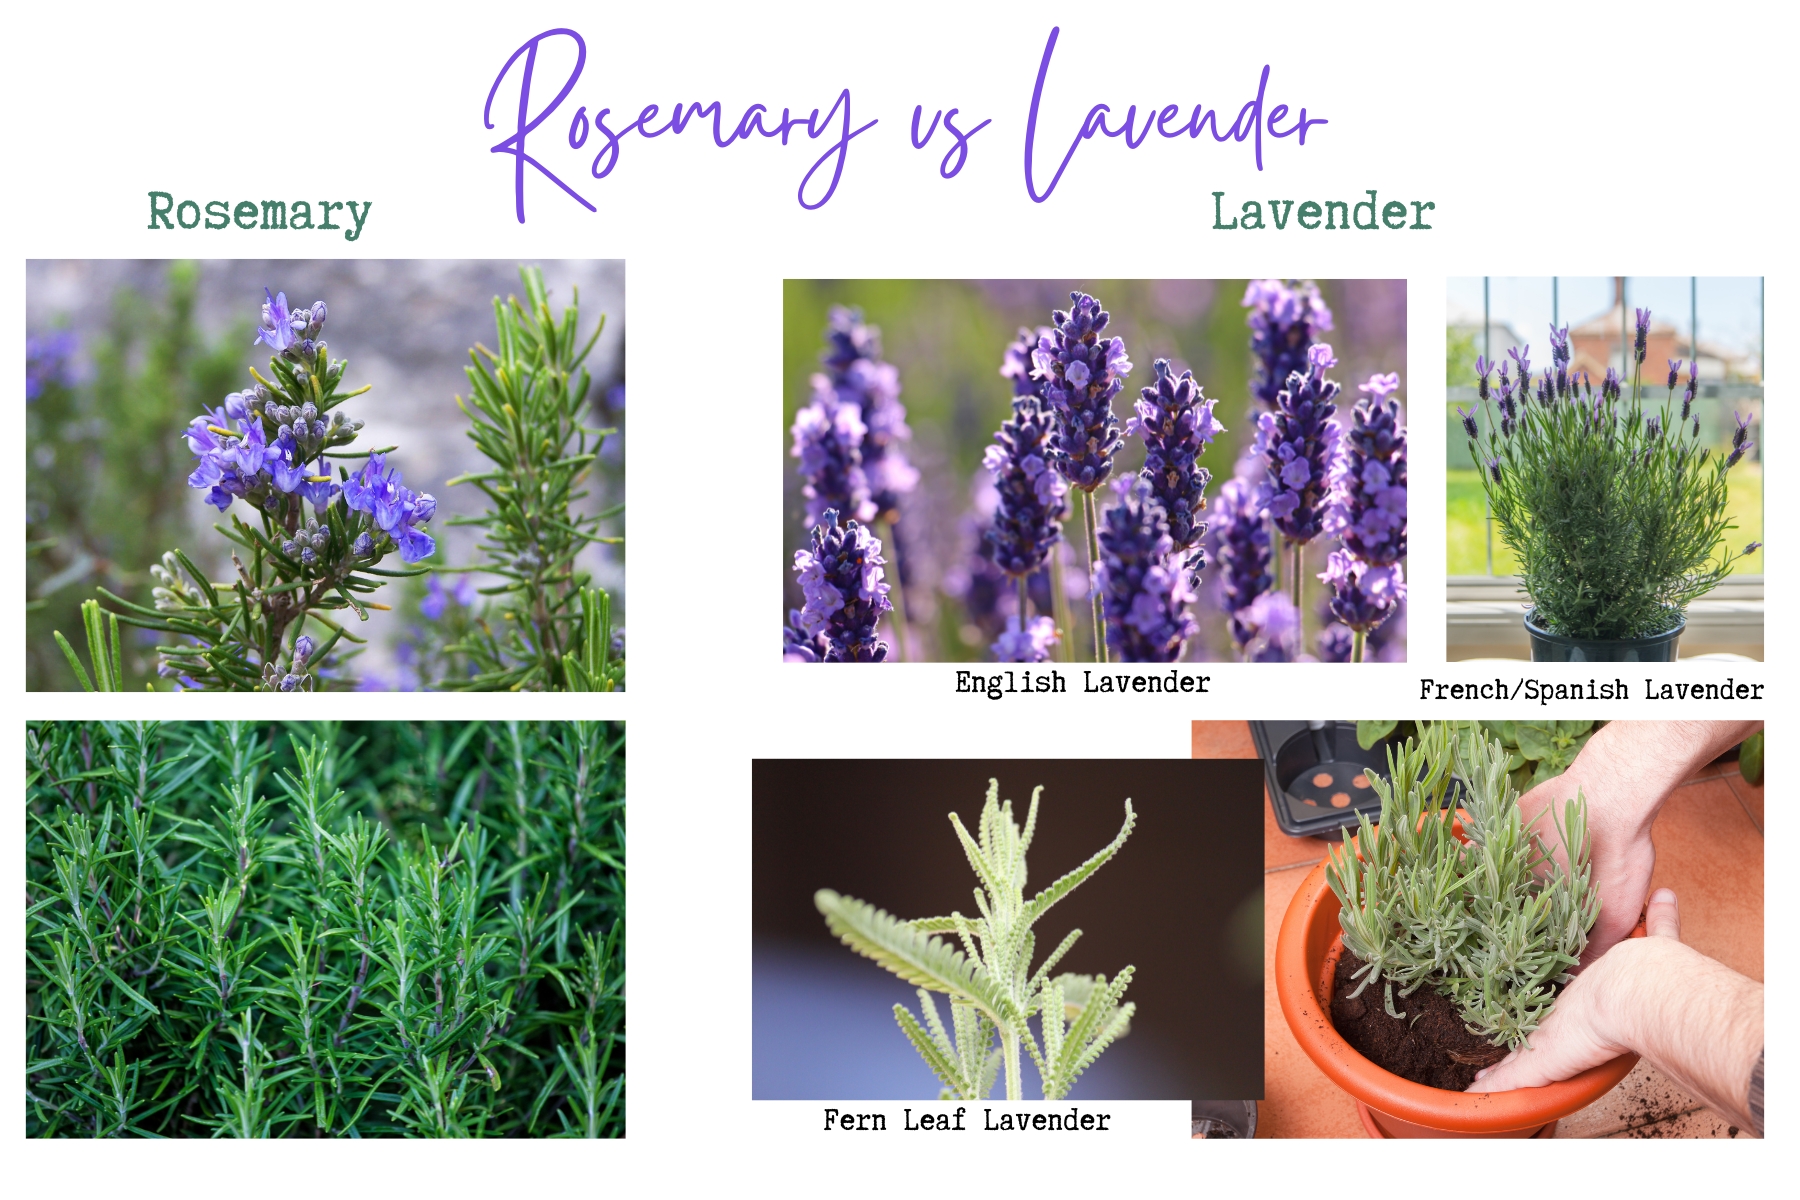 Photos of rosemary foliage and in bloom on the left and photos of lavender in bloom and it's foliage on the right. 